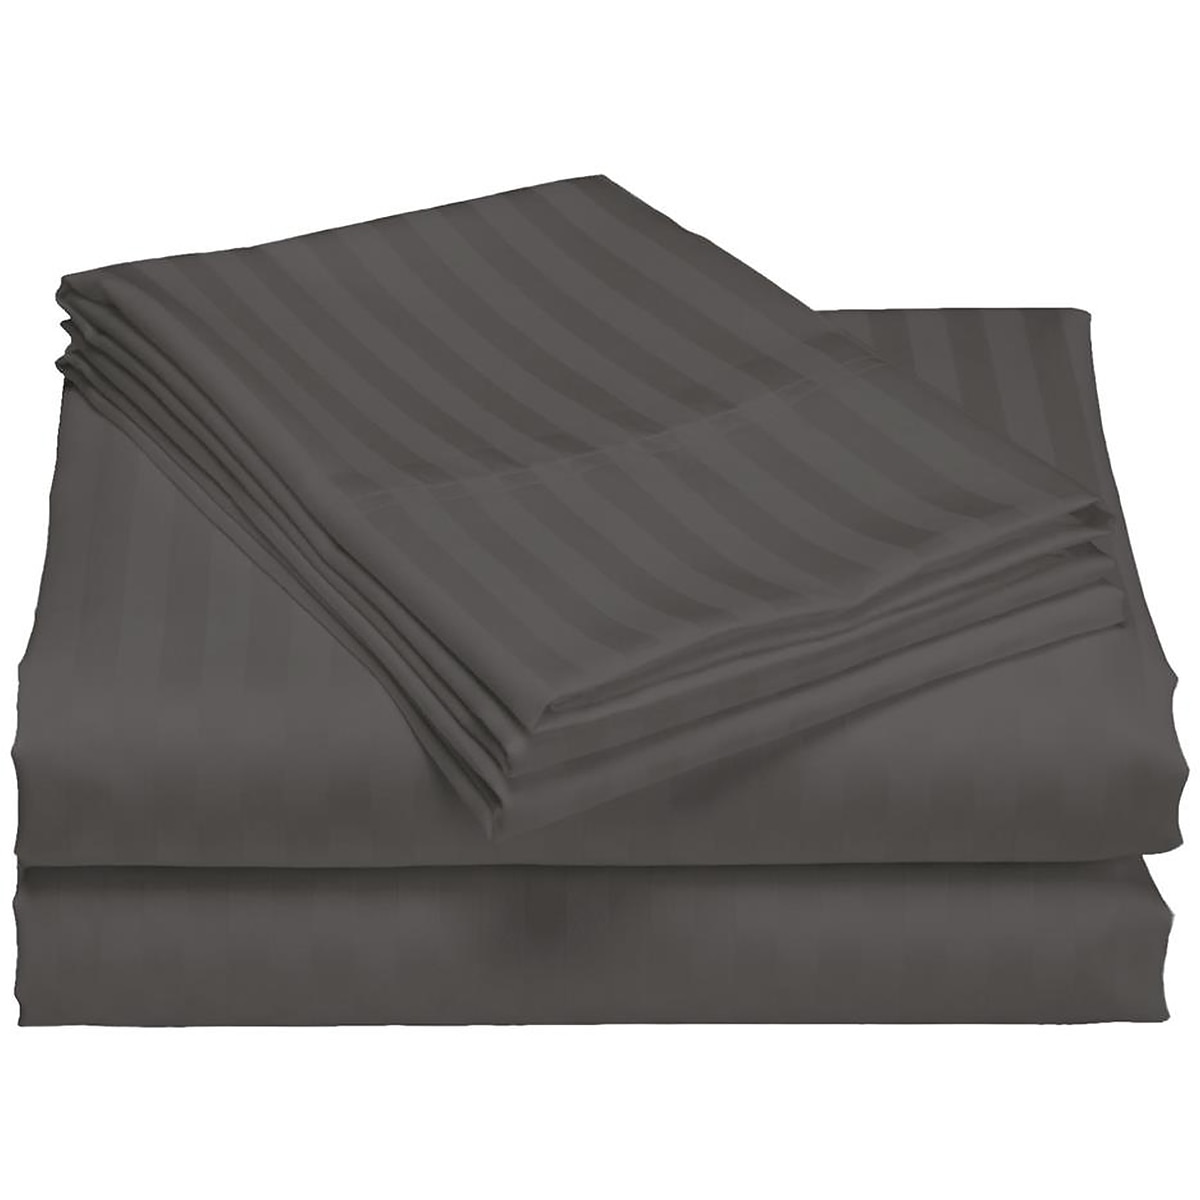 Bdirect Royal Comfort 1200 Thread count Damask Stripe Cotton Blend Quilt Cover Sets Queen Charcoal Grey